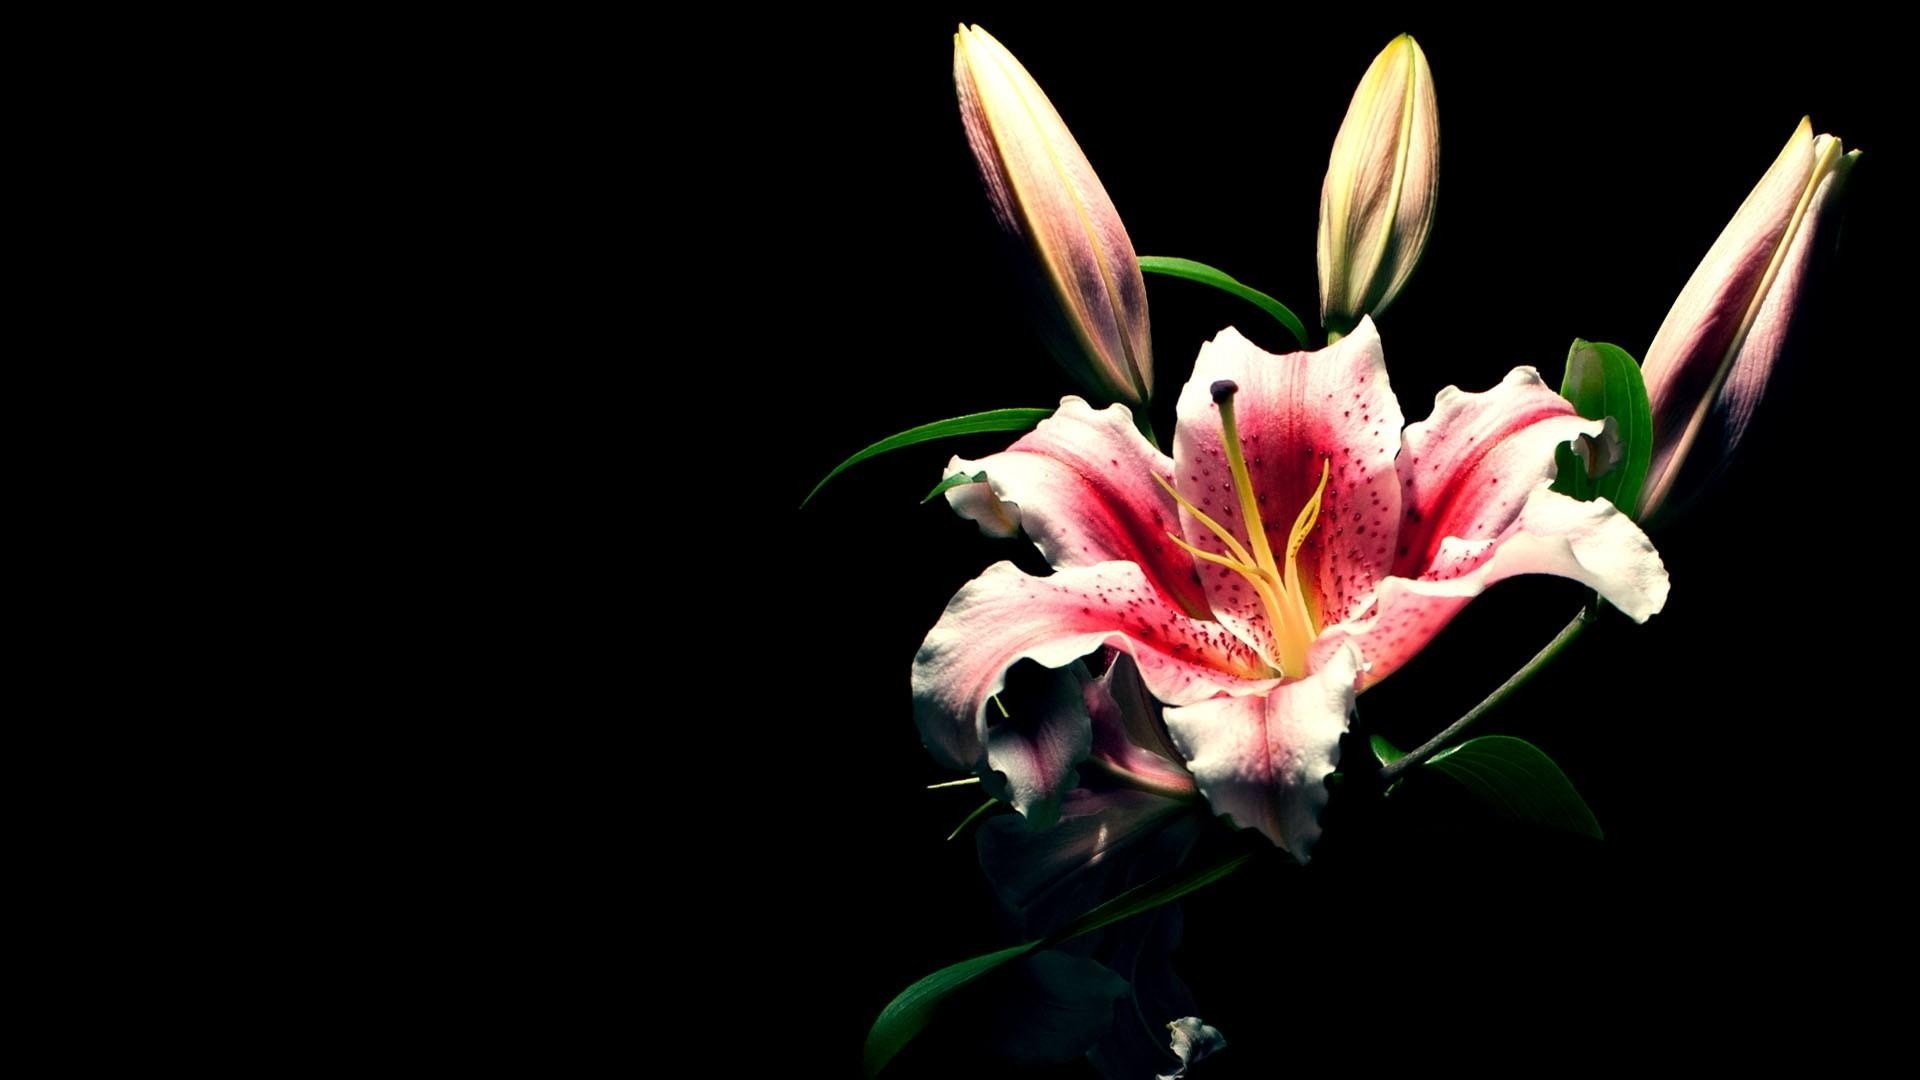 Preview Wallpaper Lily, Flower, Bud, Black Background - Lily Backgrounds - HD Wallpaper 